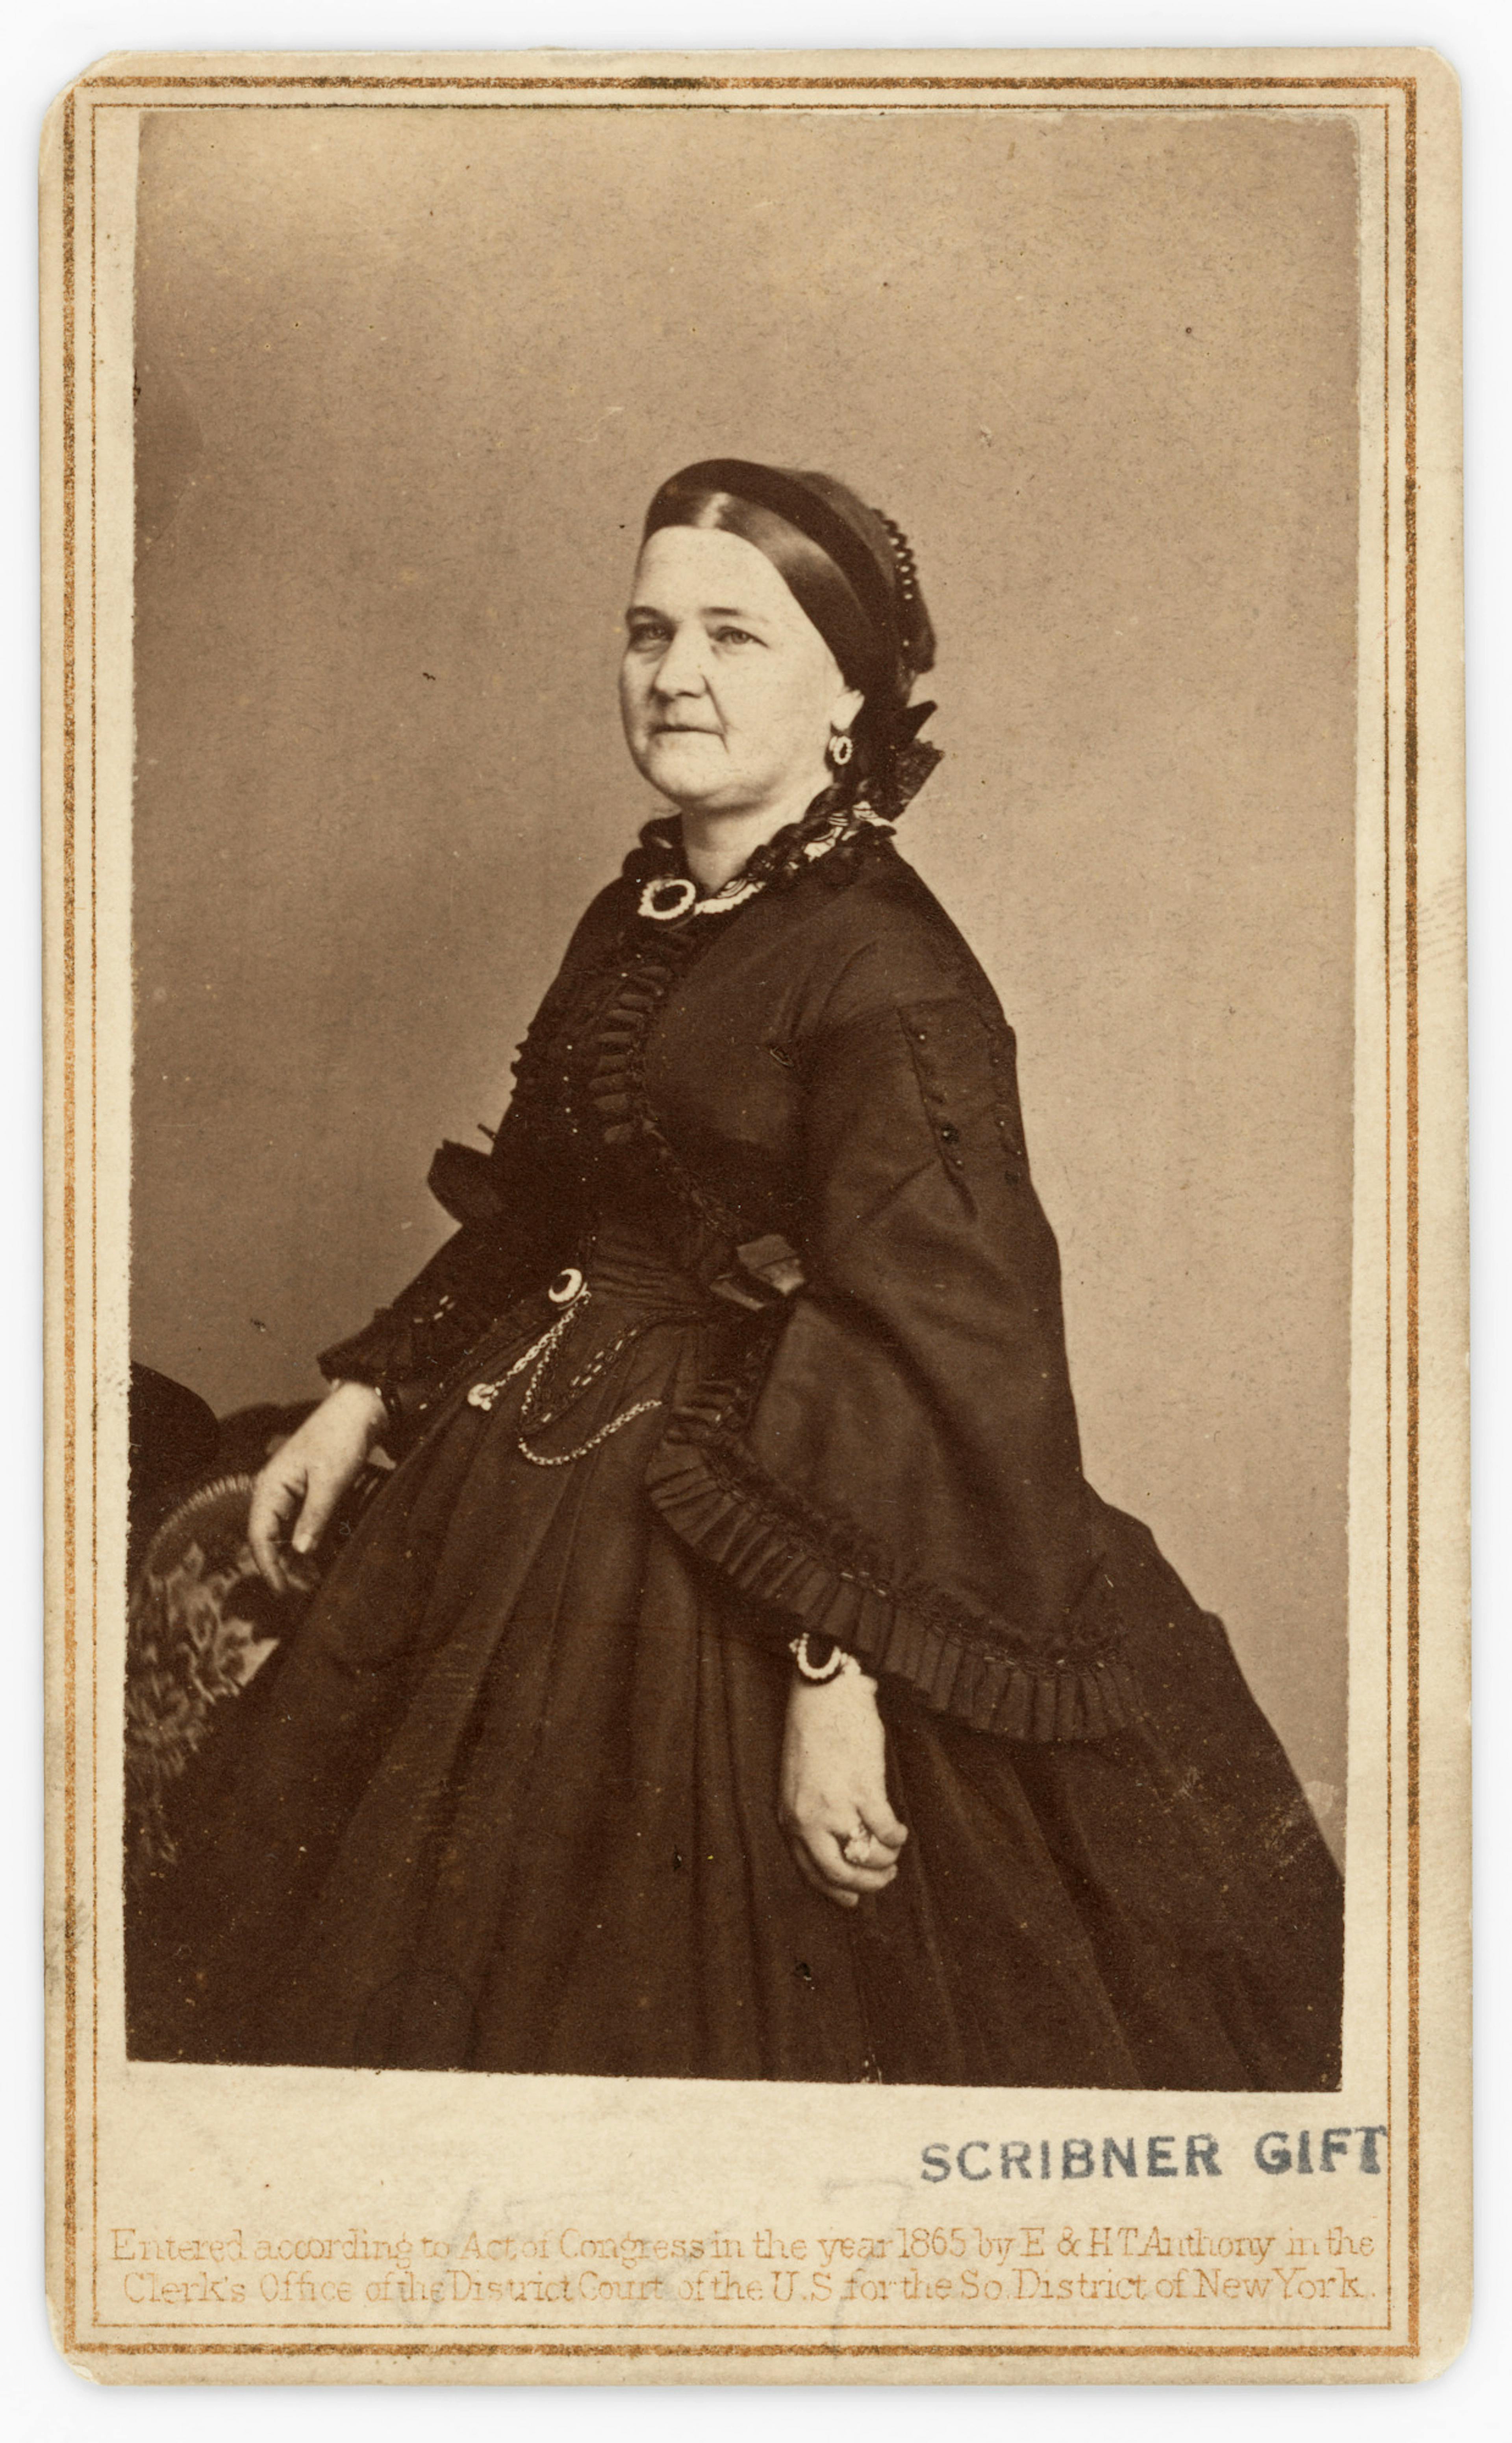 Black and white portrait photo of Mary Todd Lincoln in a floor-length gown.